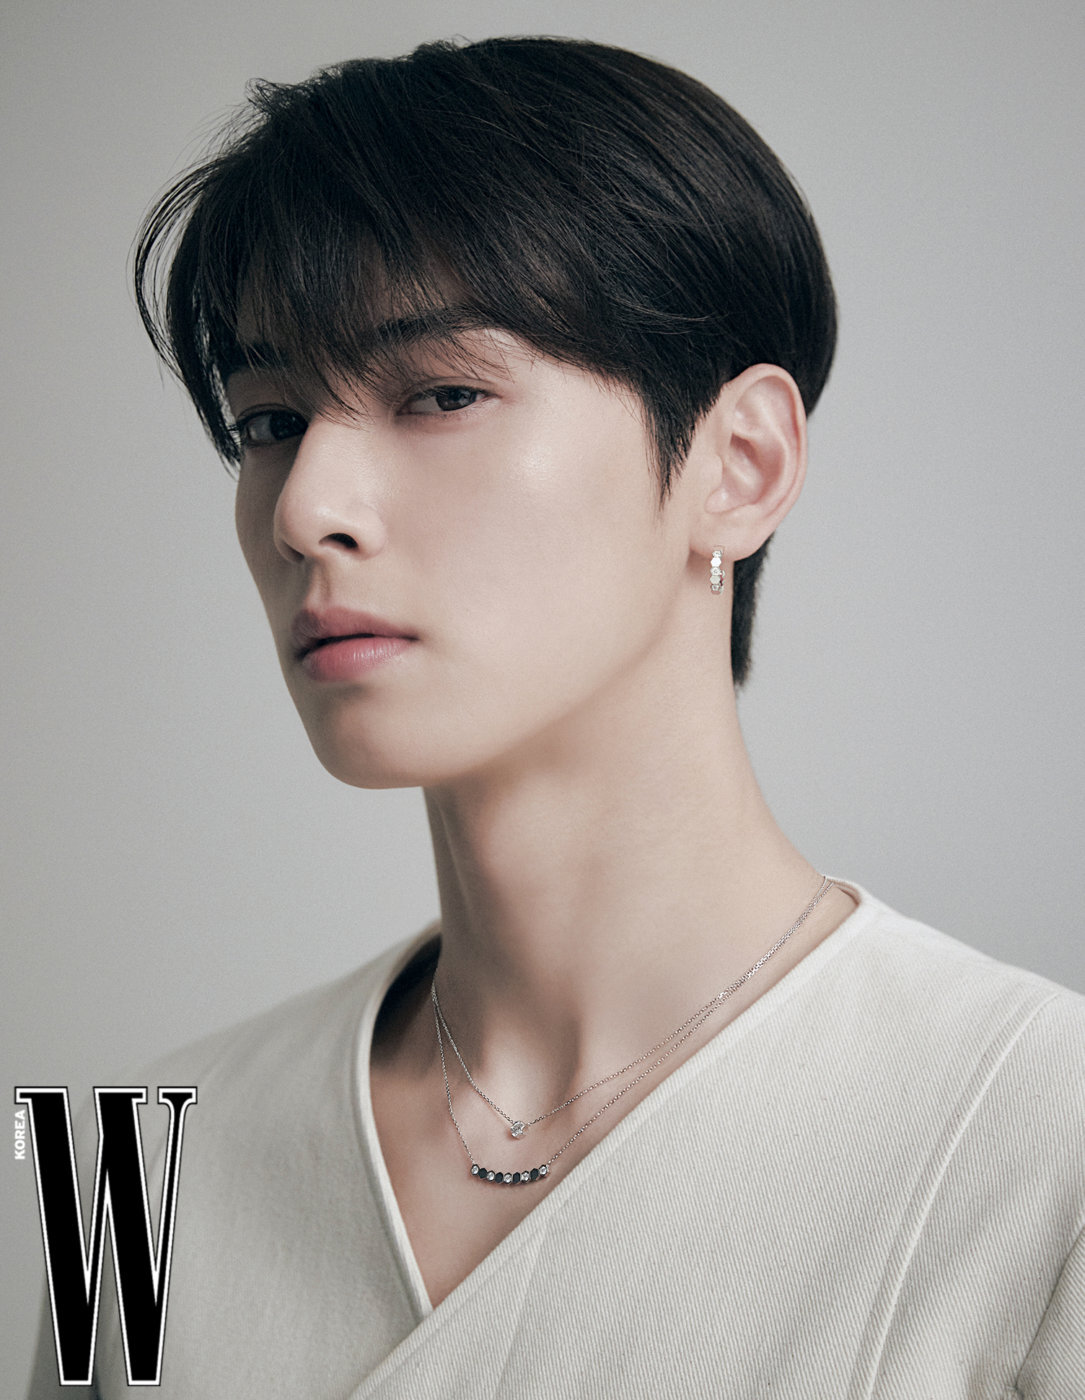 ASTRO's Cha Eunwoo Gains Attention For Looking Unreal At Recent Chaumet  Event - Koreaboo